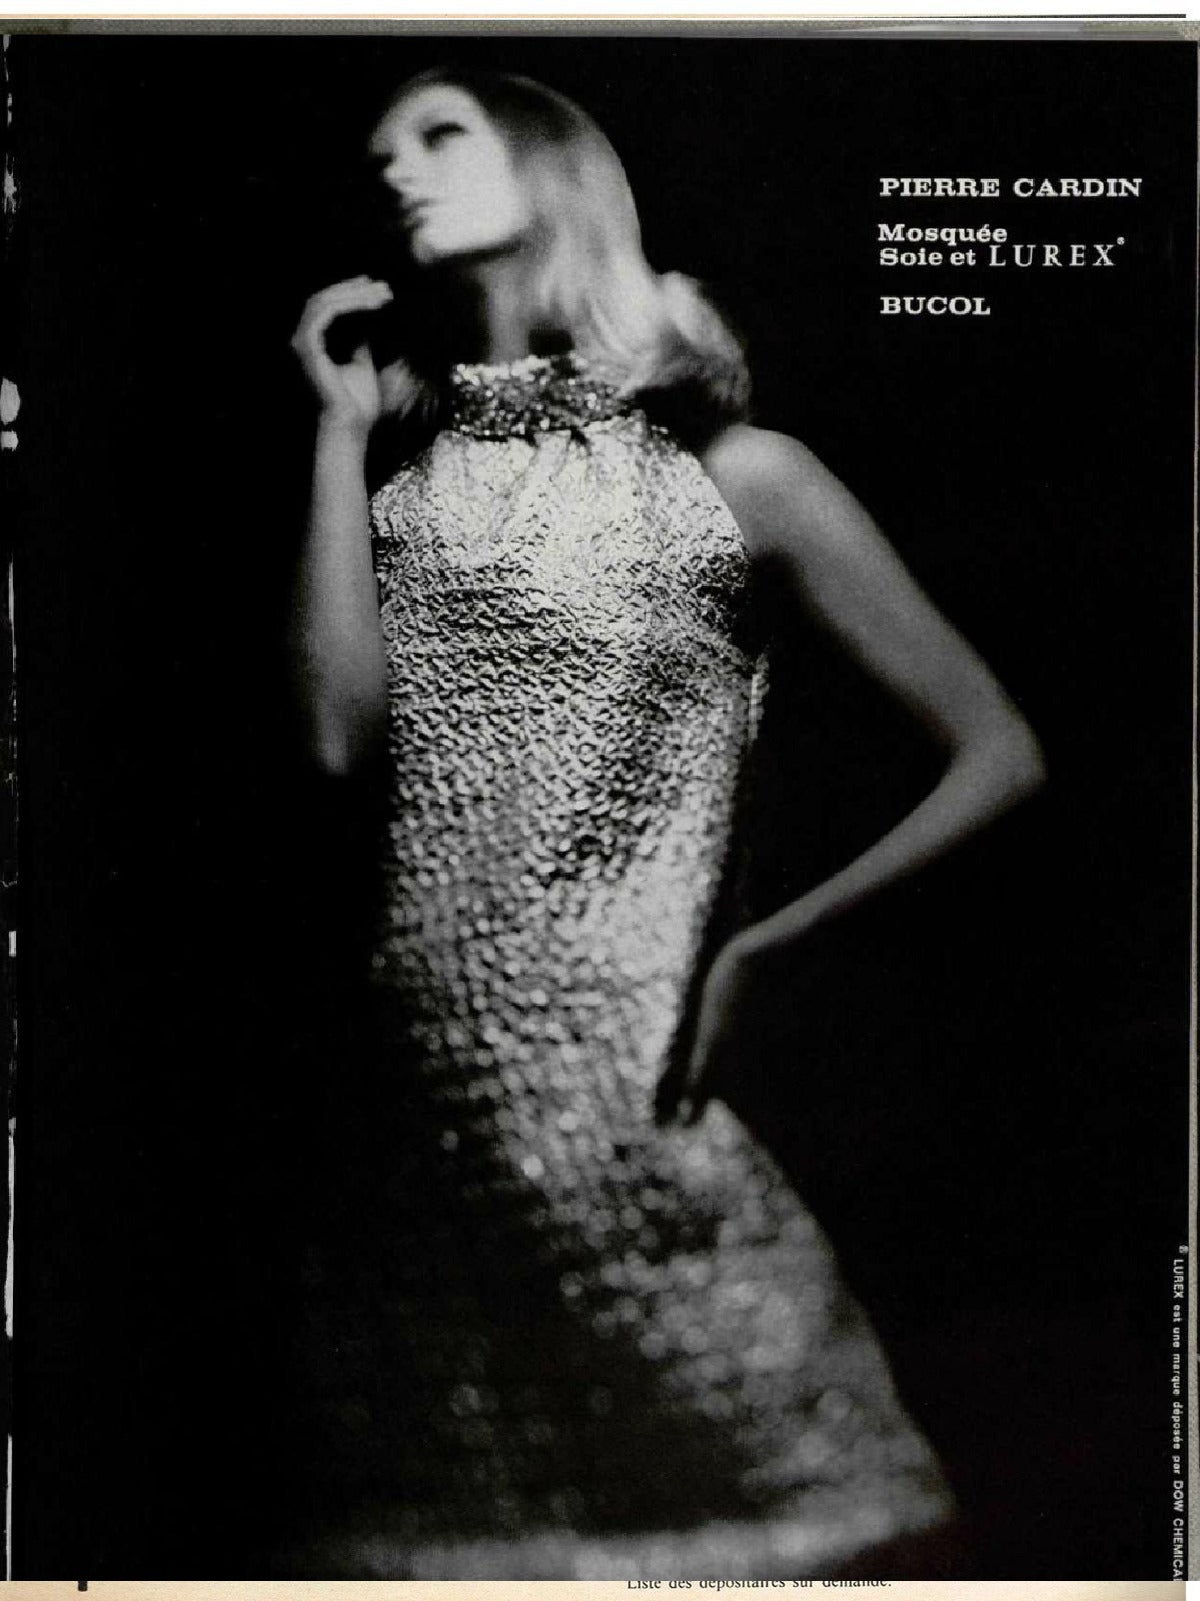 Pierre Cardin Haute Couture Lame Cocktail Dress w/Beading at Neck ca.1966 2